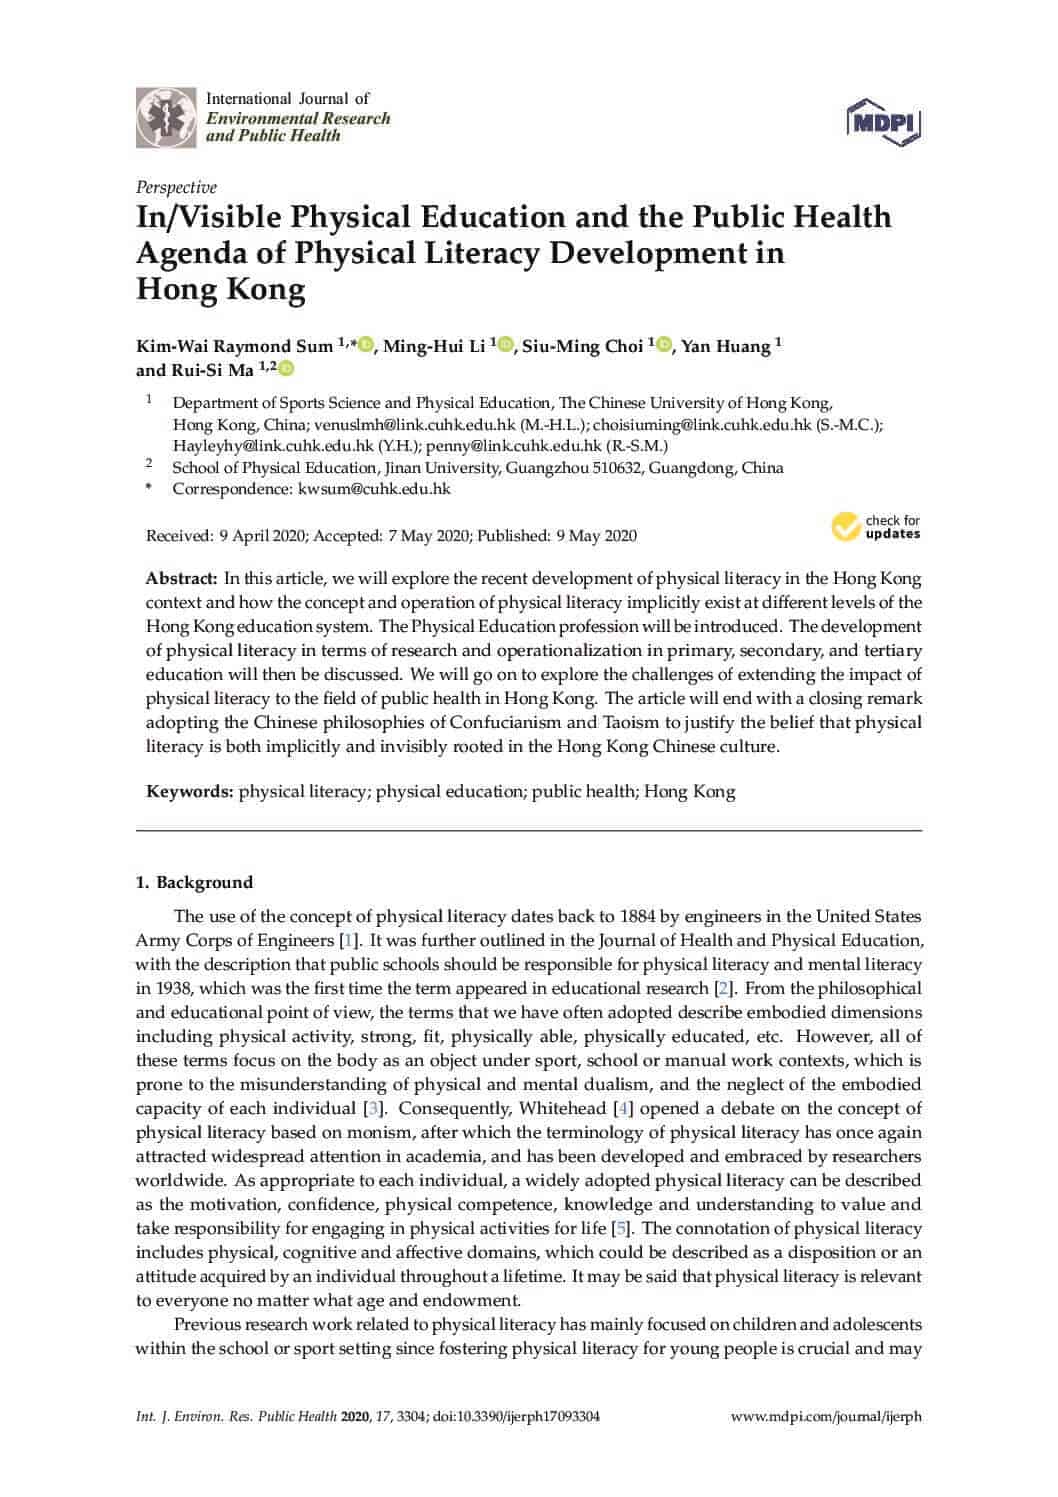 In/Visible Physical Education and the Public Health Agenda of Physical Literacy Development in Hong Kong